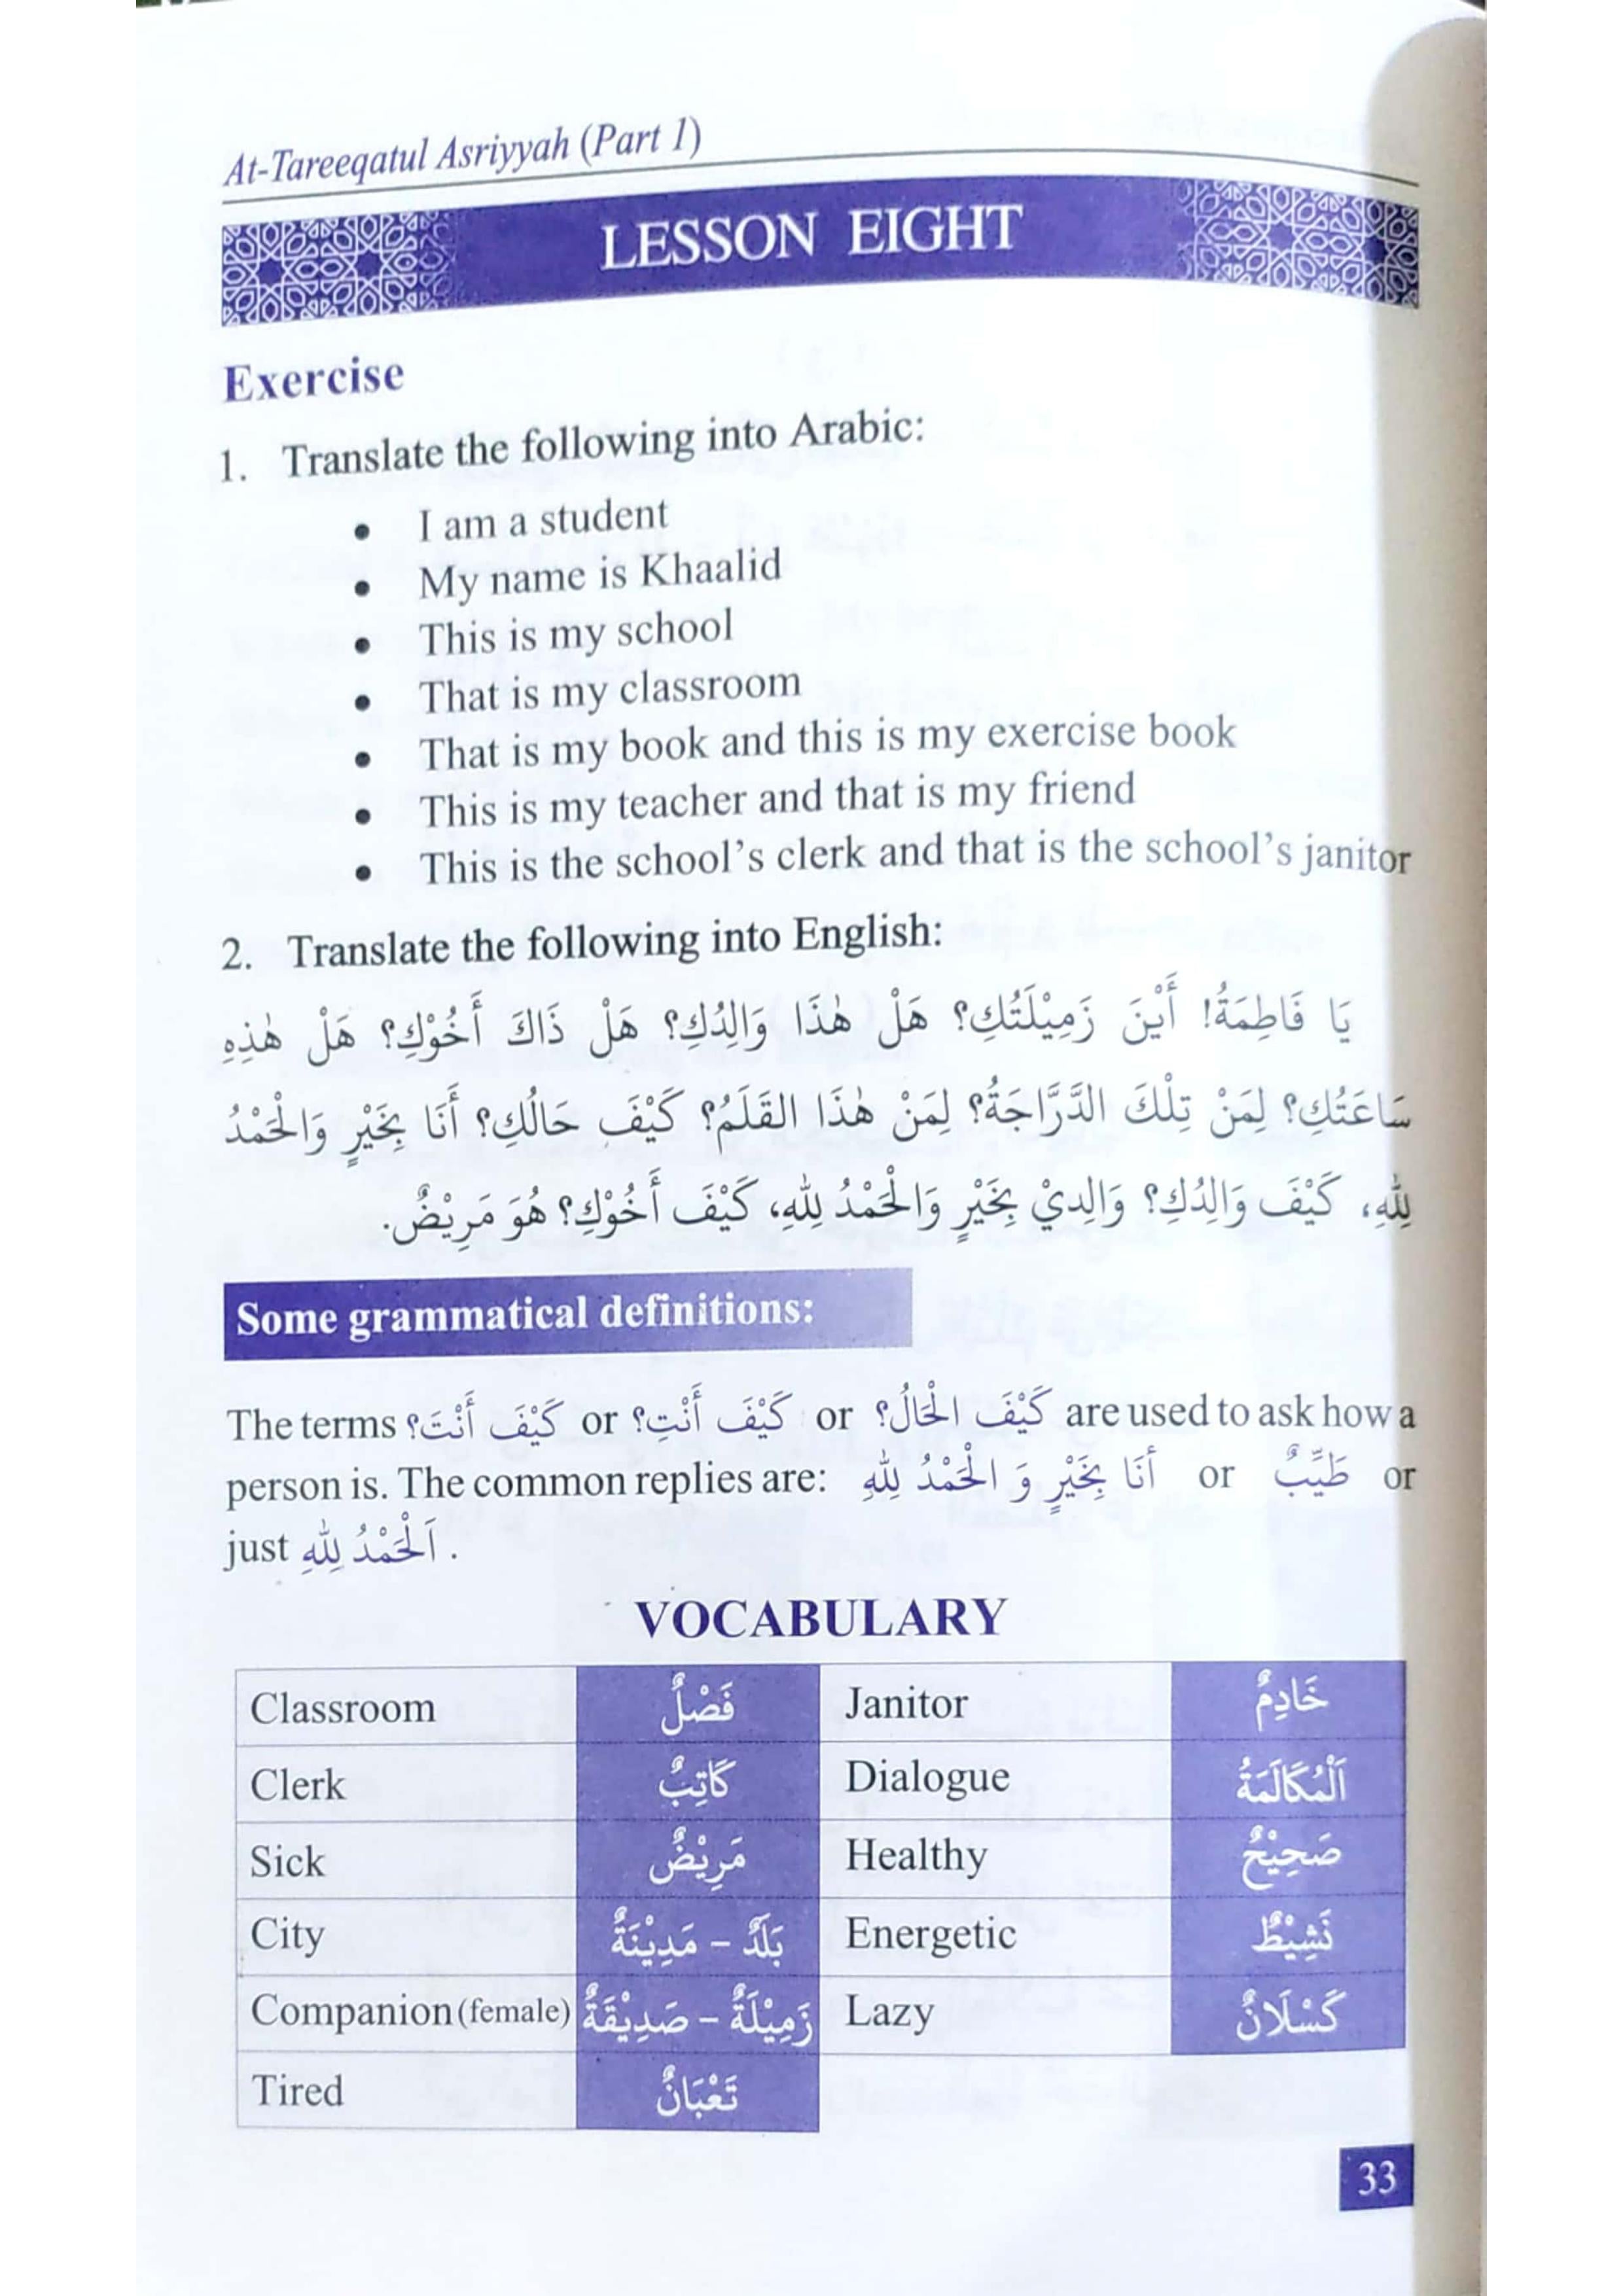 The Easy Method of Learning the Arabic Language (2 Volume Set)